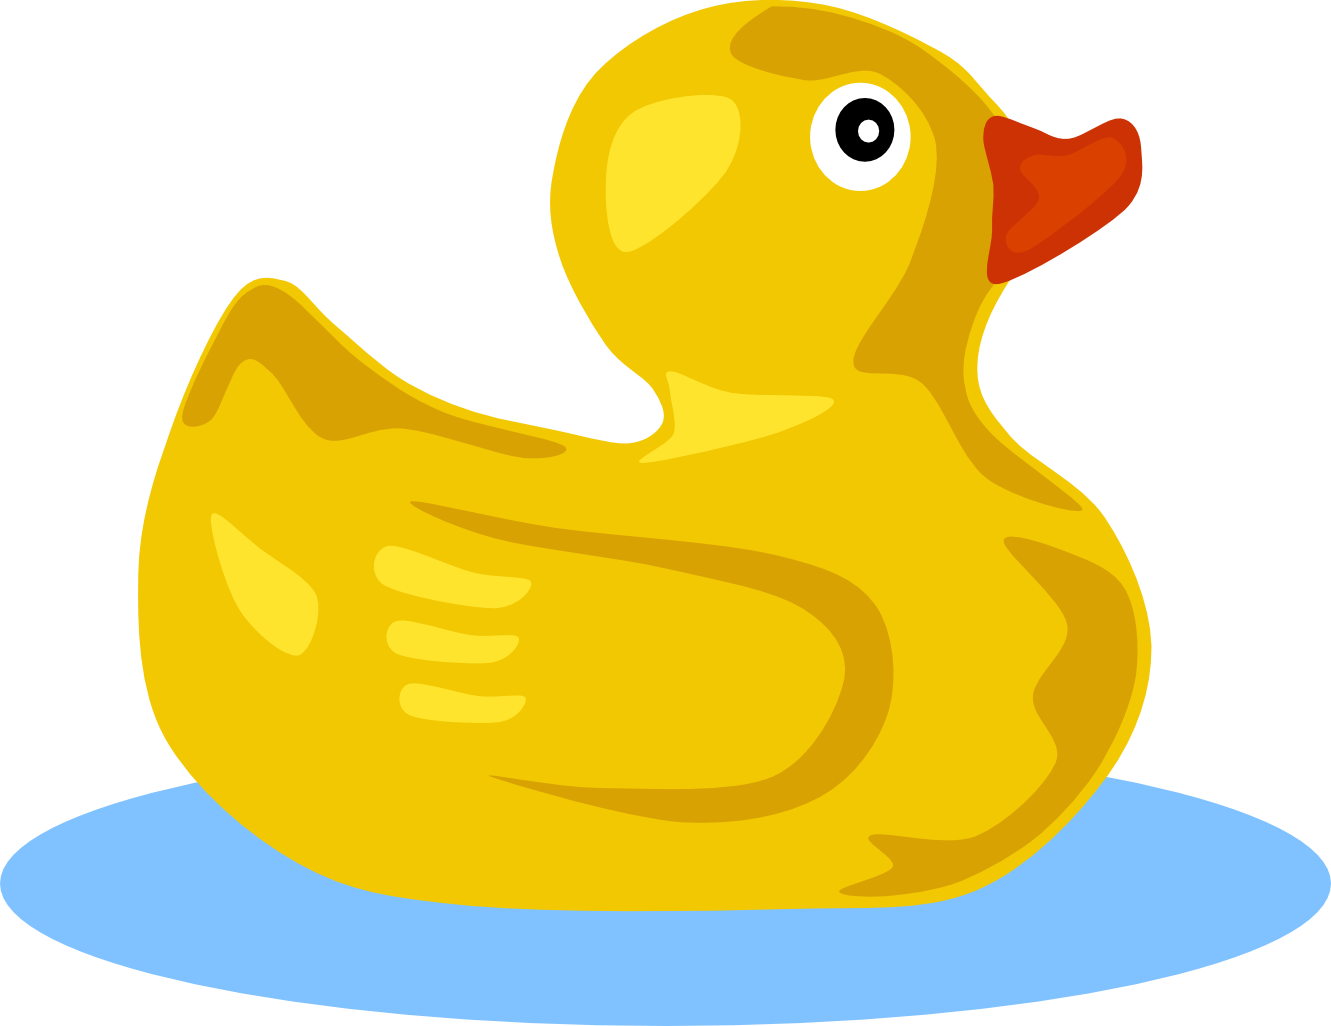 Free Rubber Ducky Clipart - ClipArt Best